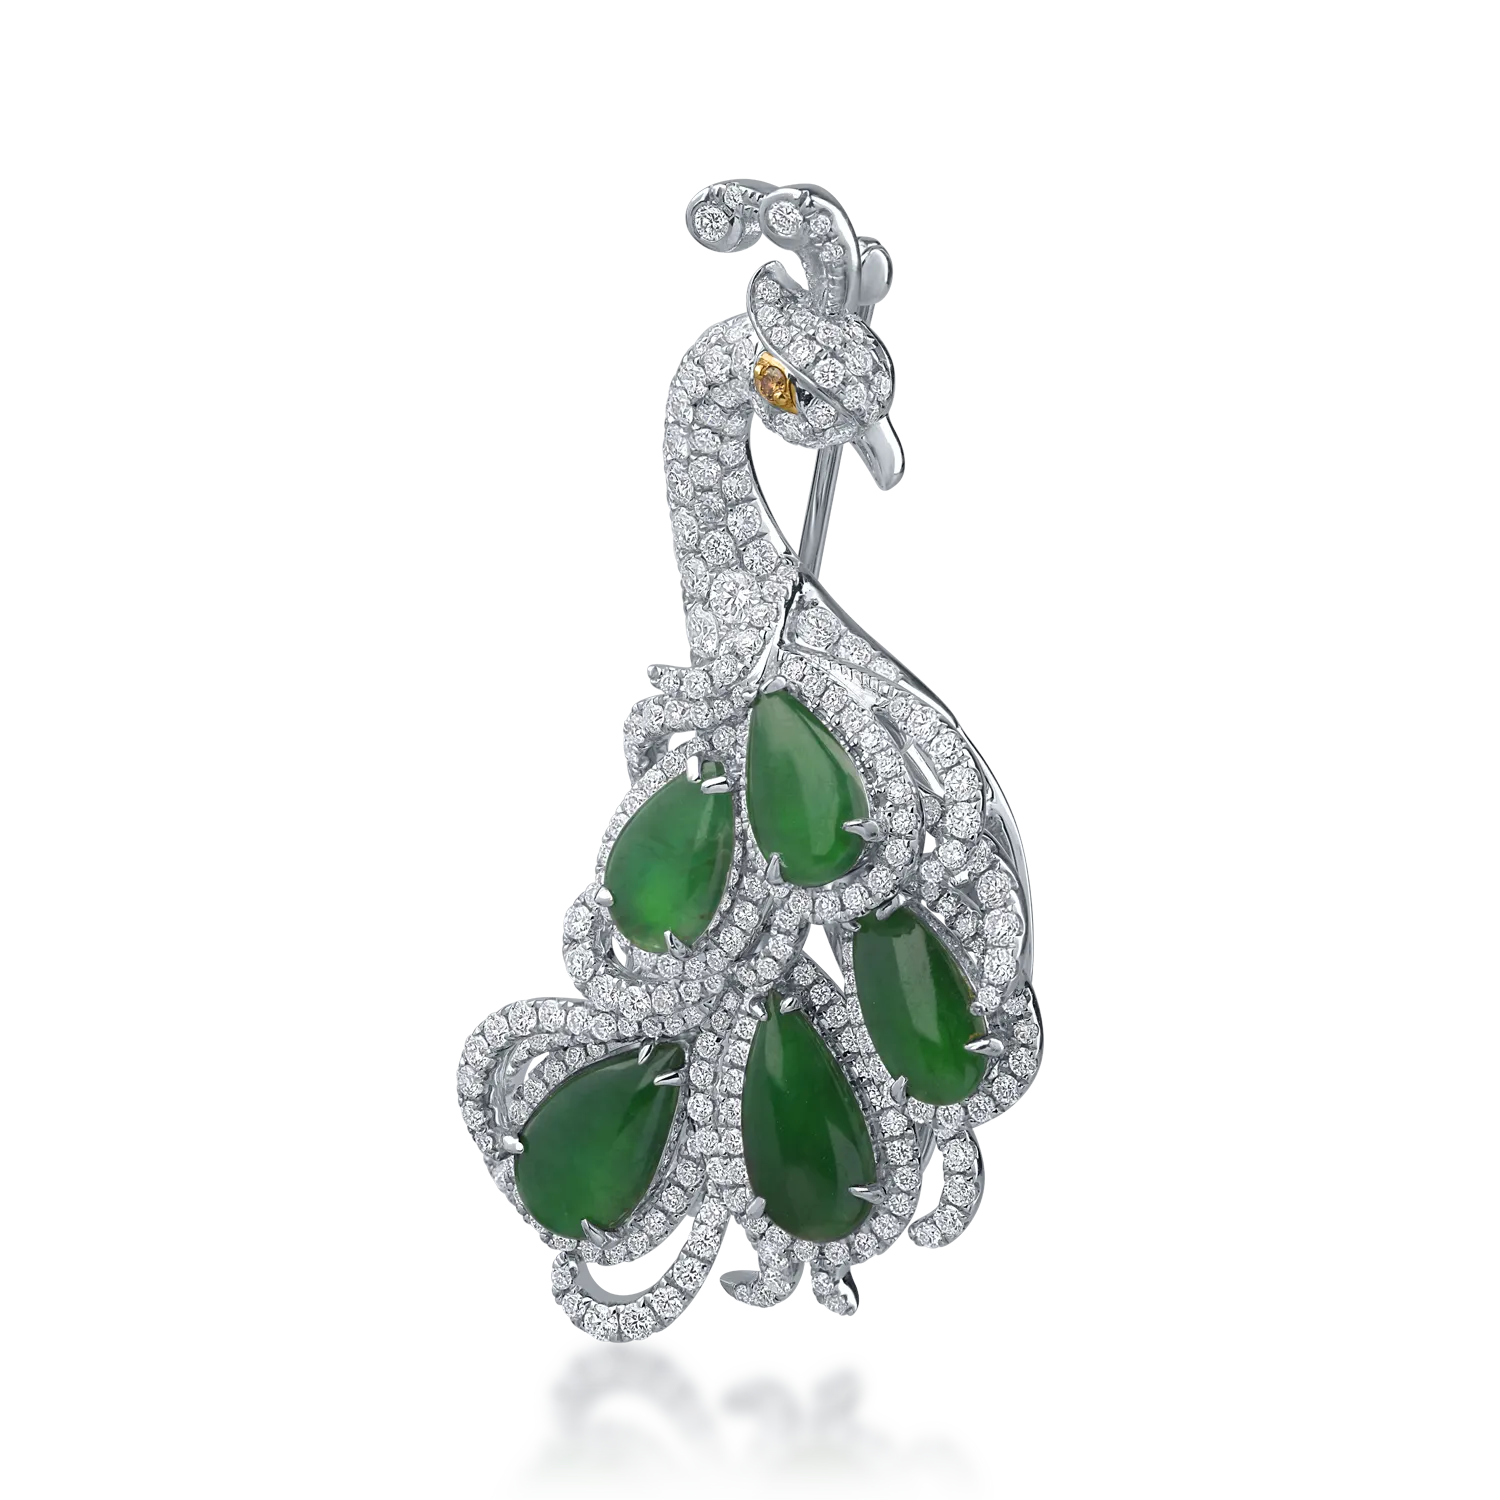 White gold brooch with 1.91ct diamonds and 0.51ct jade